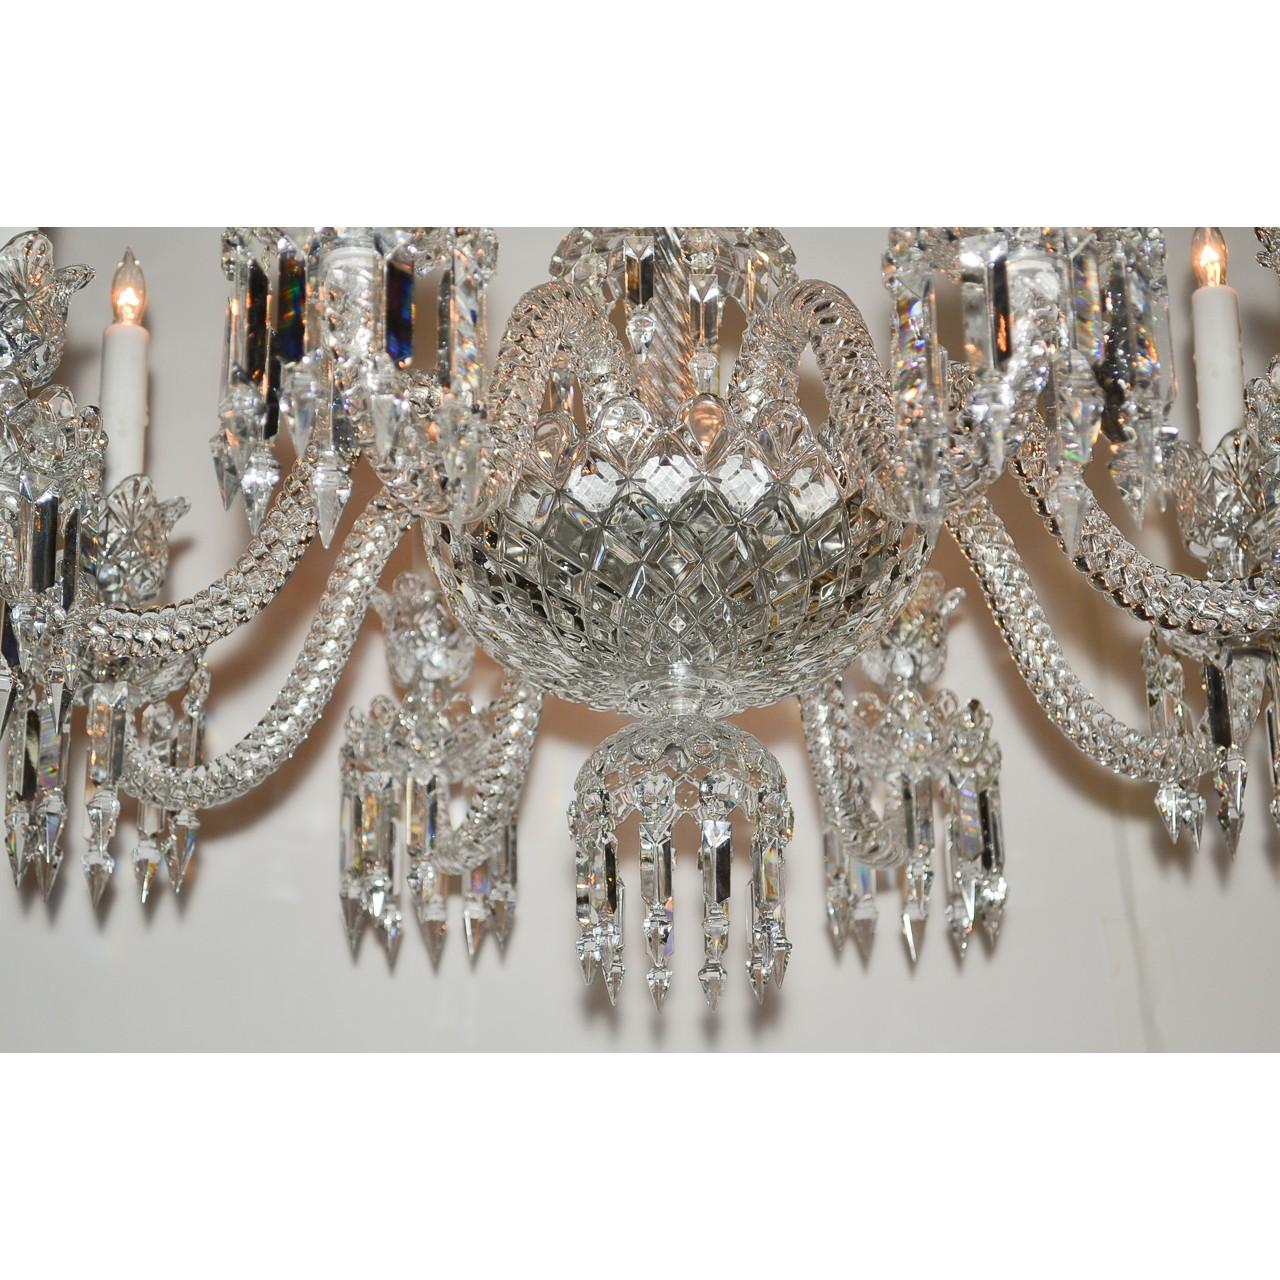 Exquisite signed Baccarat cut crystal chandelier of paragon quality. The scalloped and vase-shaped crown atop curved projections with flower-cup dangles and icicle prisms. The diamond patterned contoured stem mounted with eight gracefully scrolled